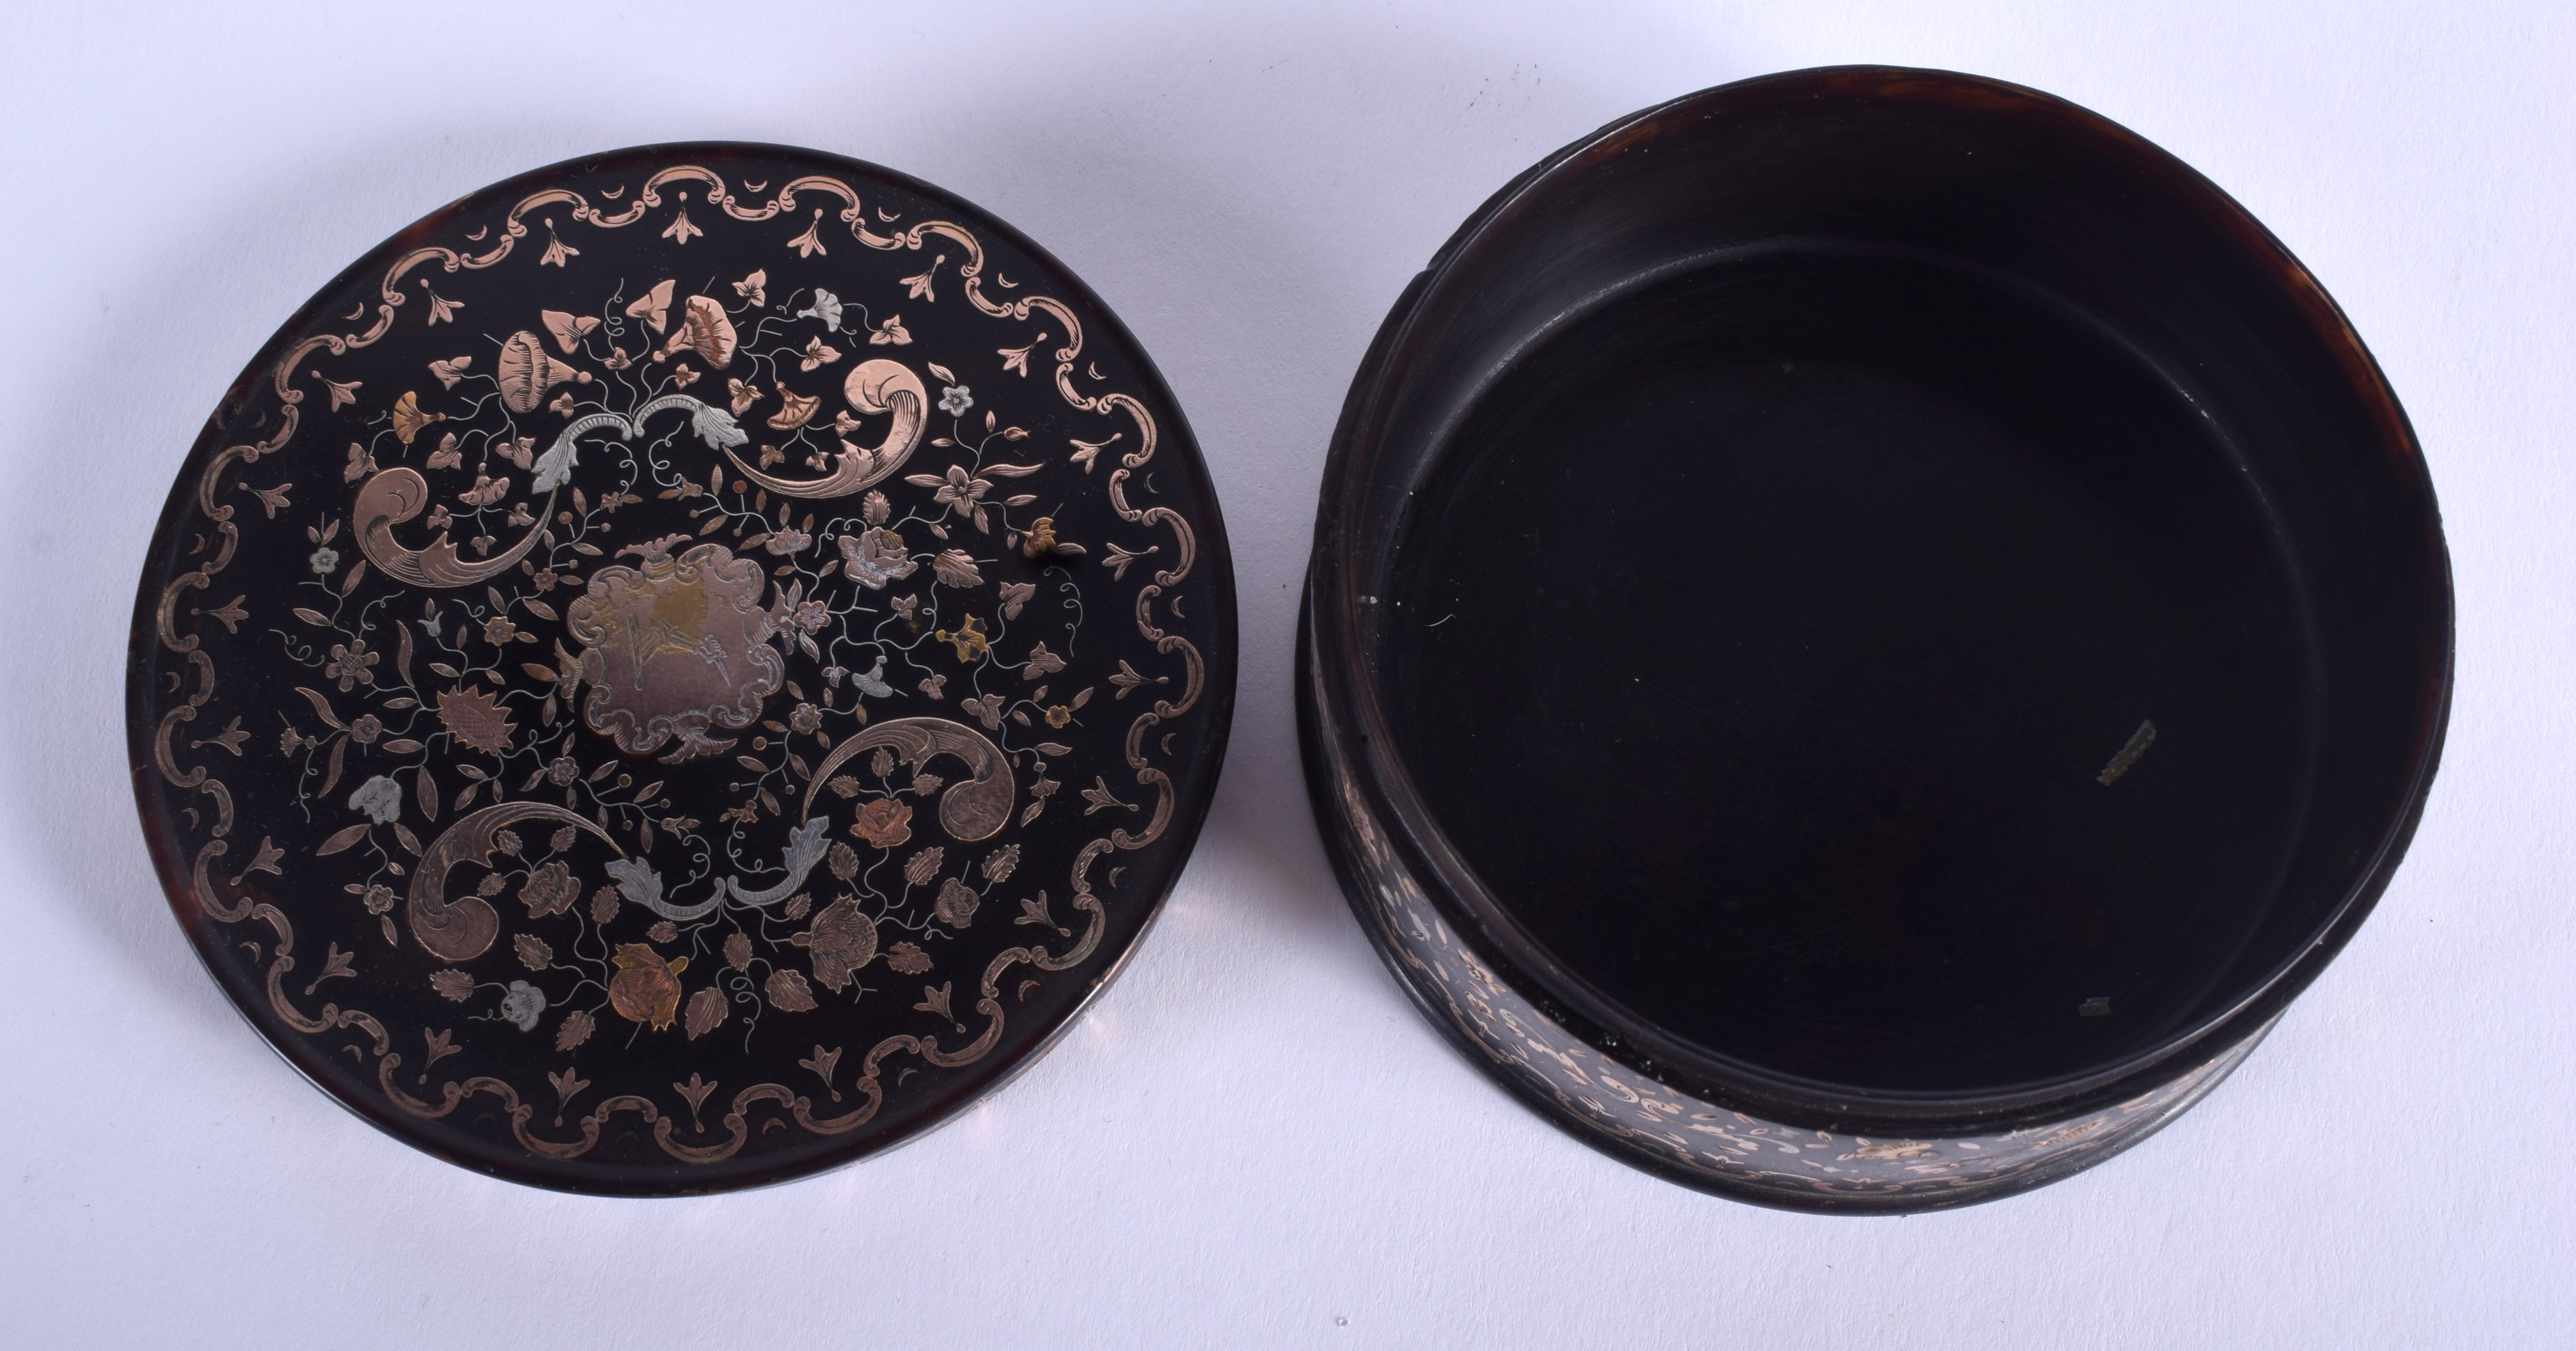 A GOOD GEORGEIII GOLD INLAID PIQUE WORK TORTOISESHELL BOX AND COVER decorated with foliage. 9 cm x - Image 4 of 5